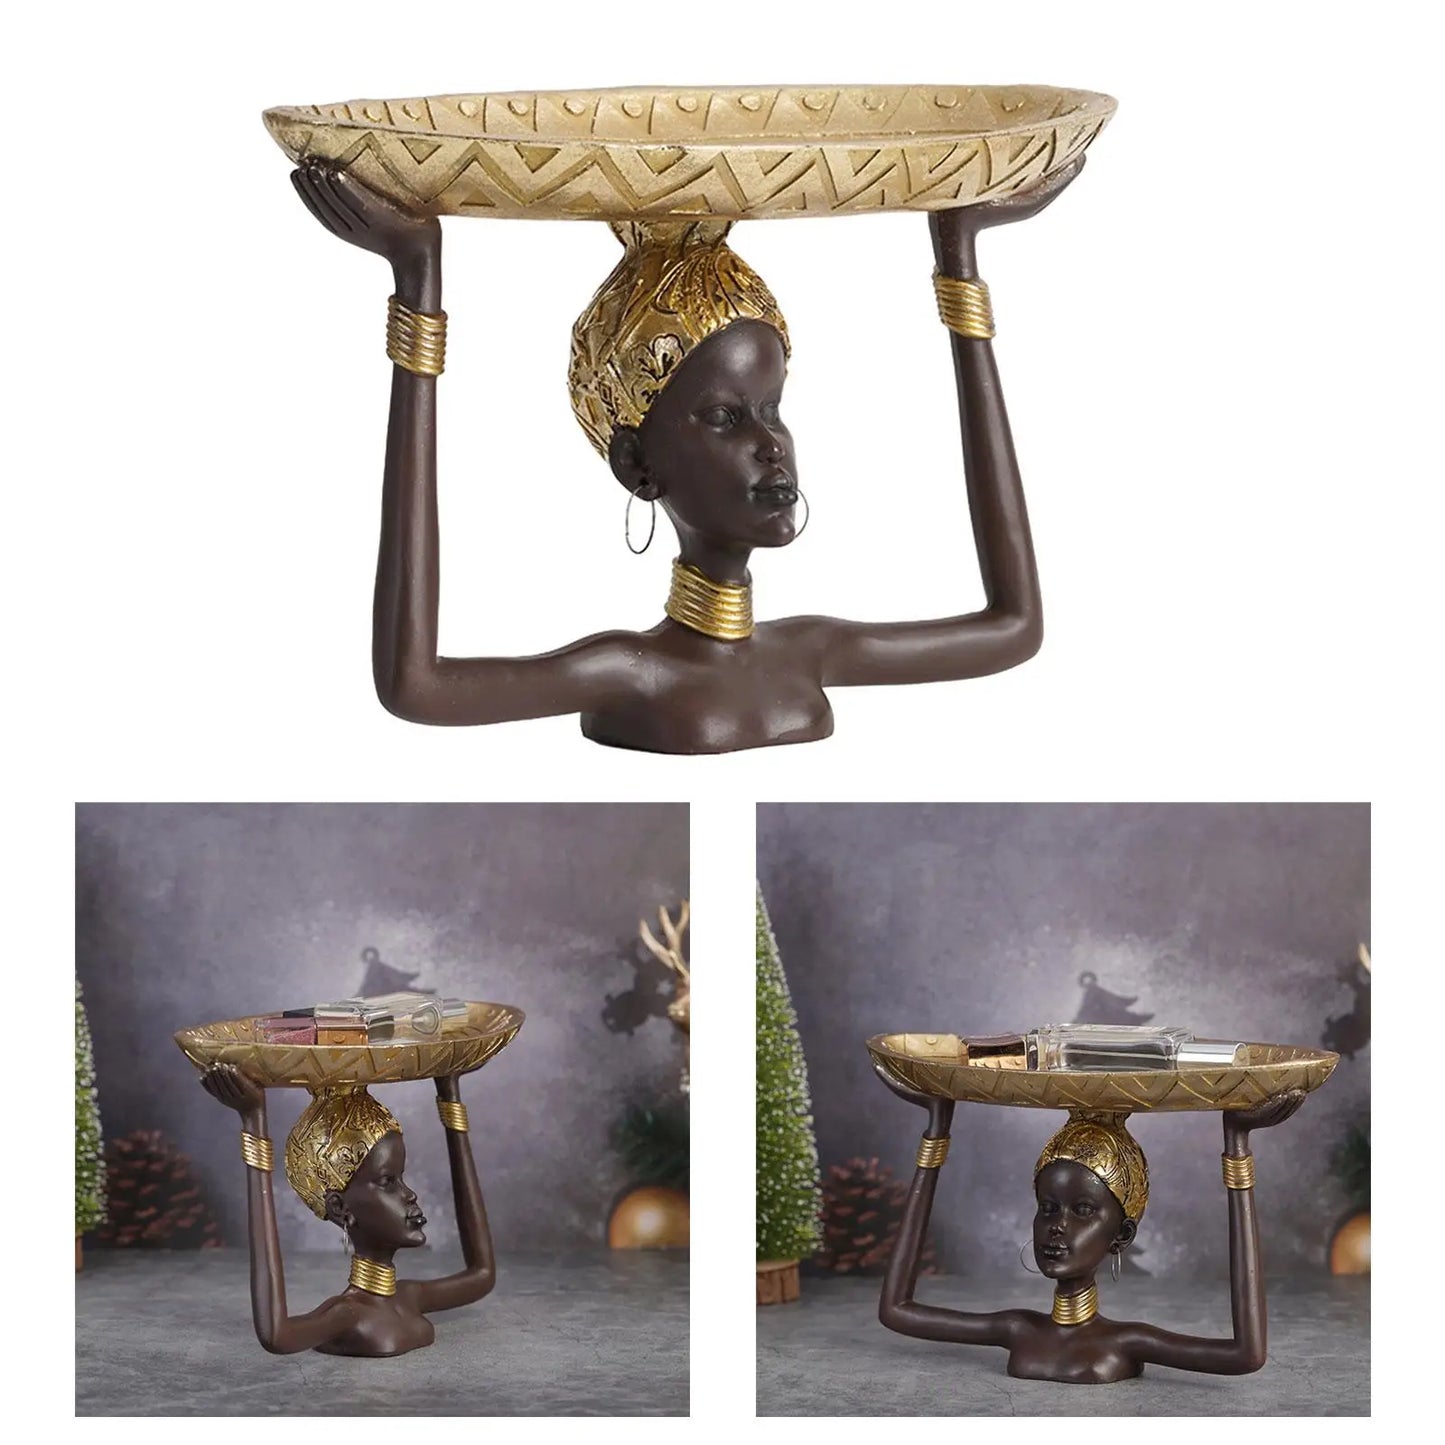 Lady Statue Tray, African Figurines, Human Craft for Bedroom Office Display Decor